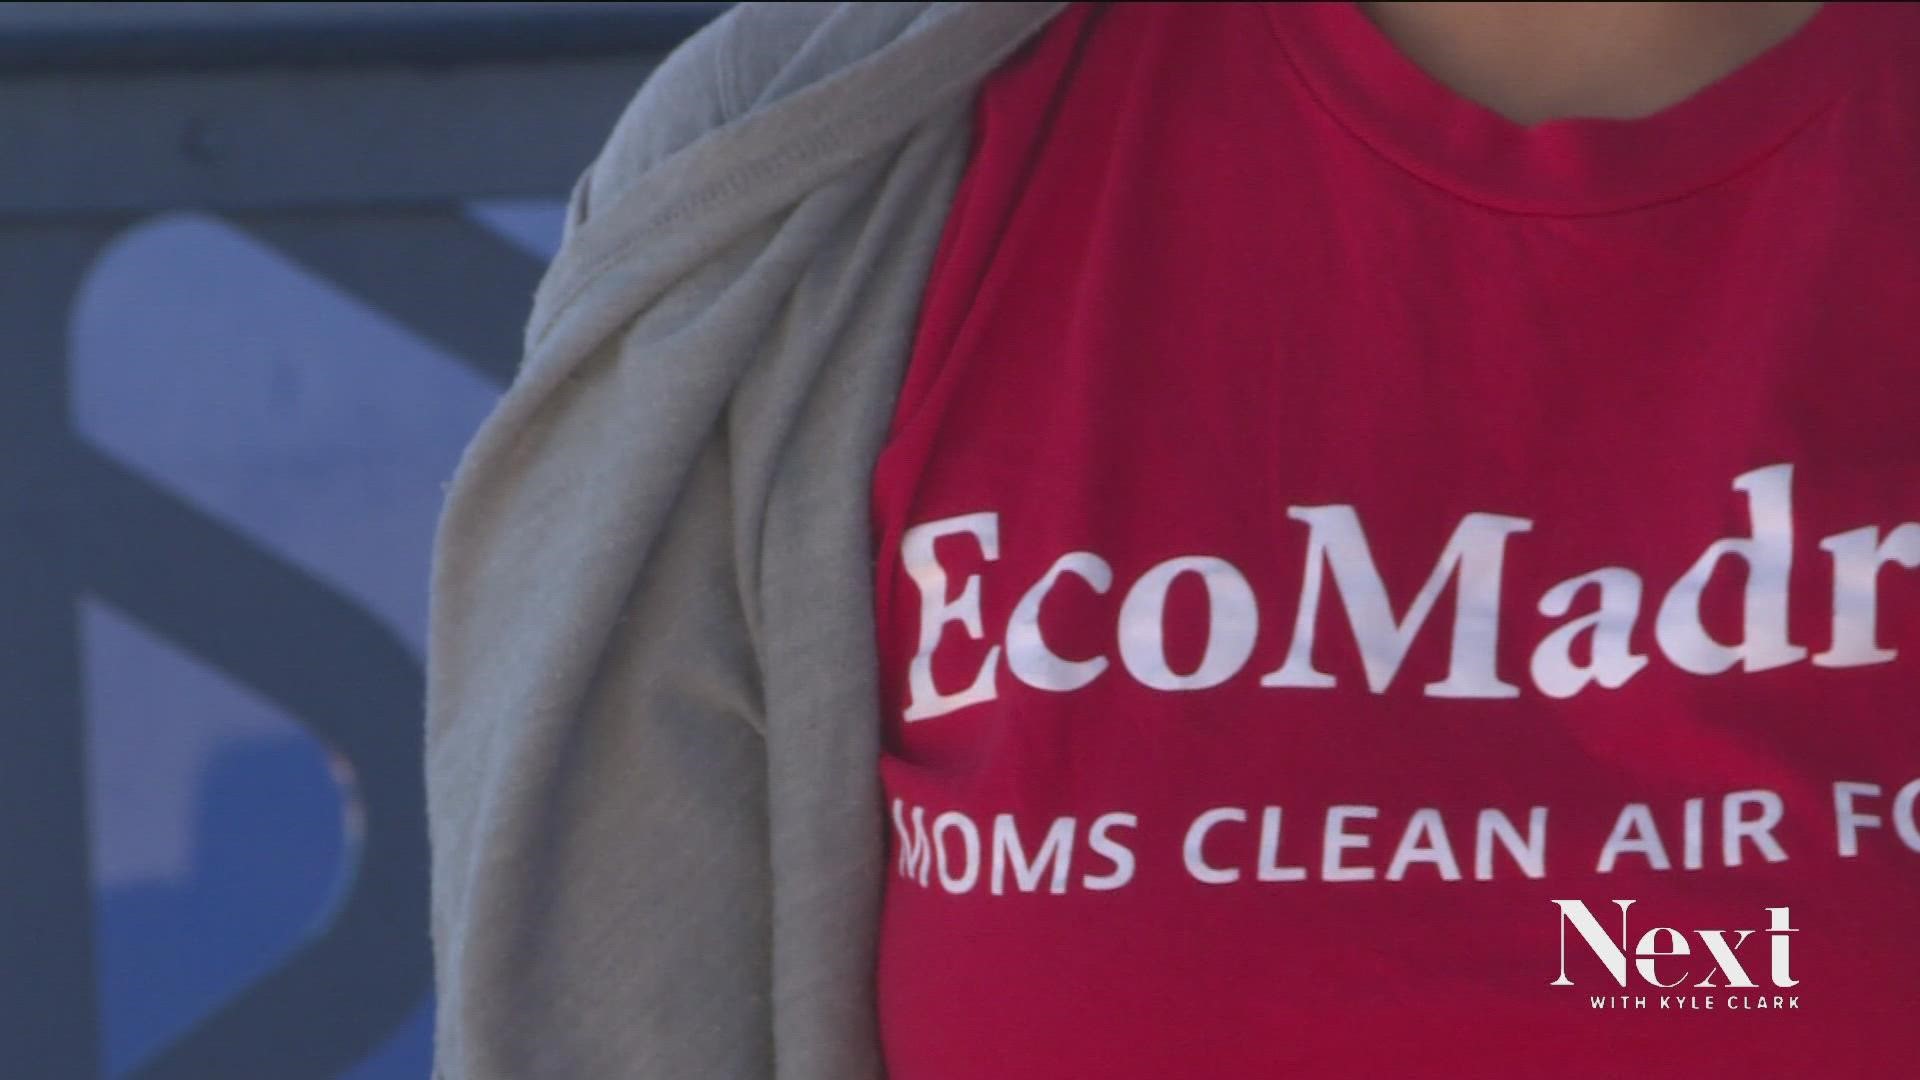 EcoMadres is bringing moms together to support things like air quality monitoring in their communities, many of which are low income, black and brown neighborhoods.